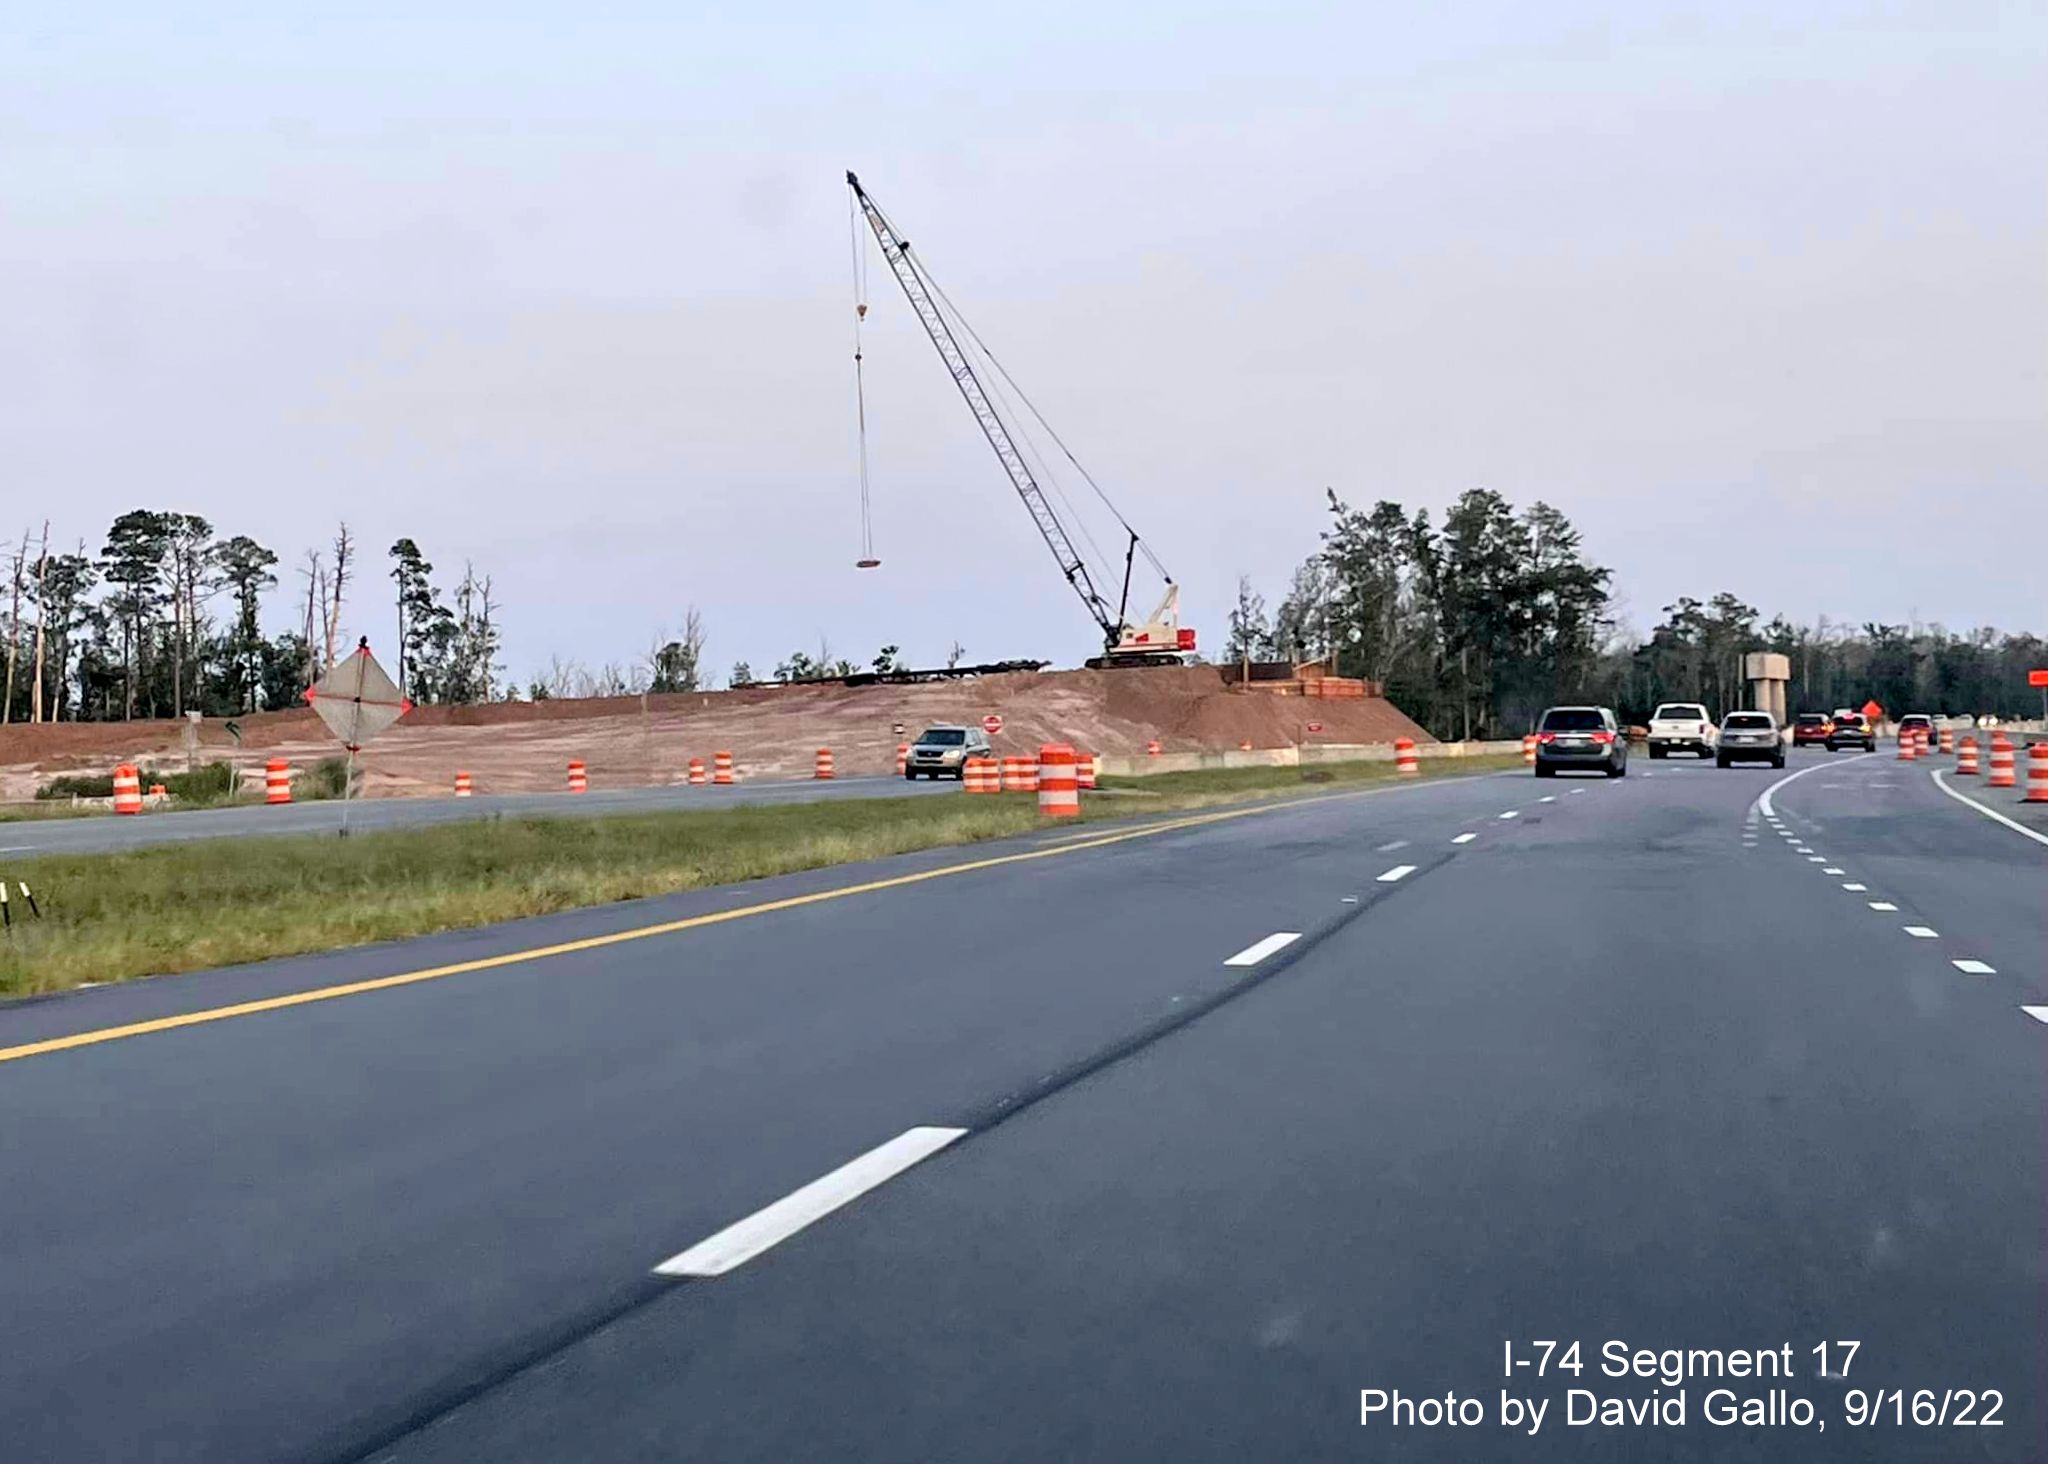 Image of bridge construction from US 74 East in Boardman interchange construction zone, by David Gallo September 2022